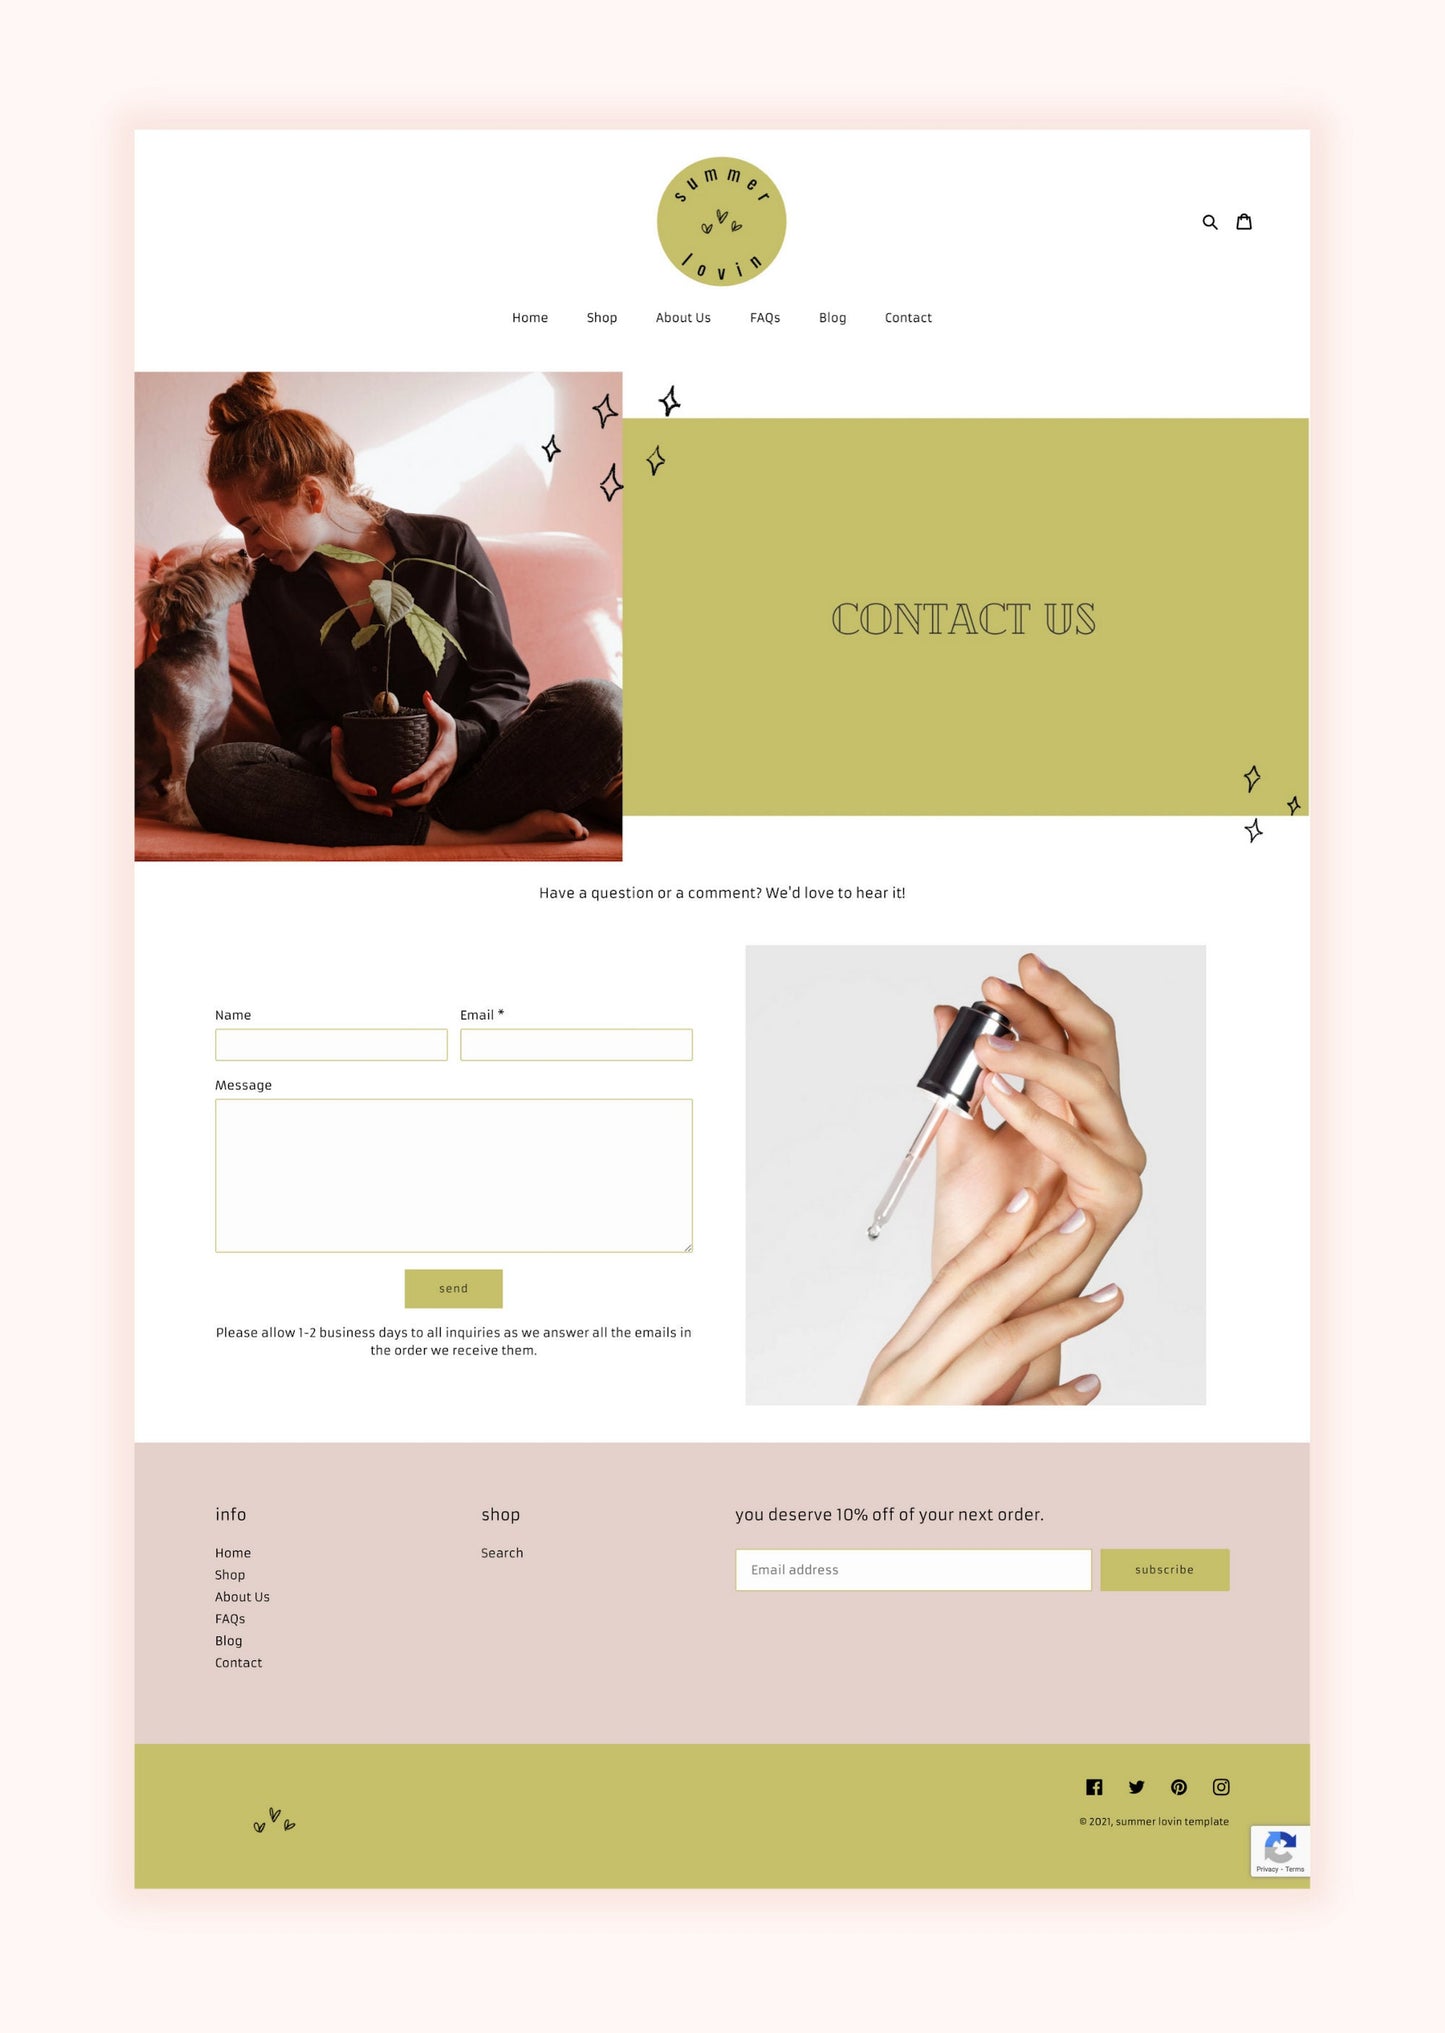 Shopify Theme | Colorful Shopify Website Design | Blog design | Shopify Template | Shopify Design | Colorful Shopify Theme | Easy Shopify